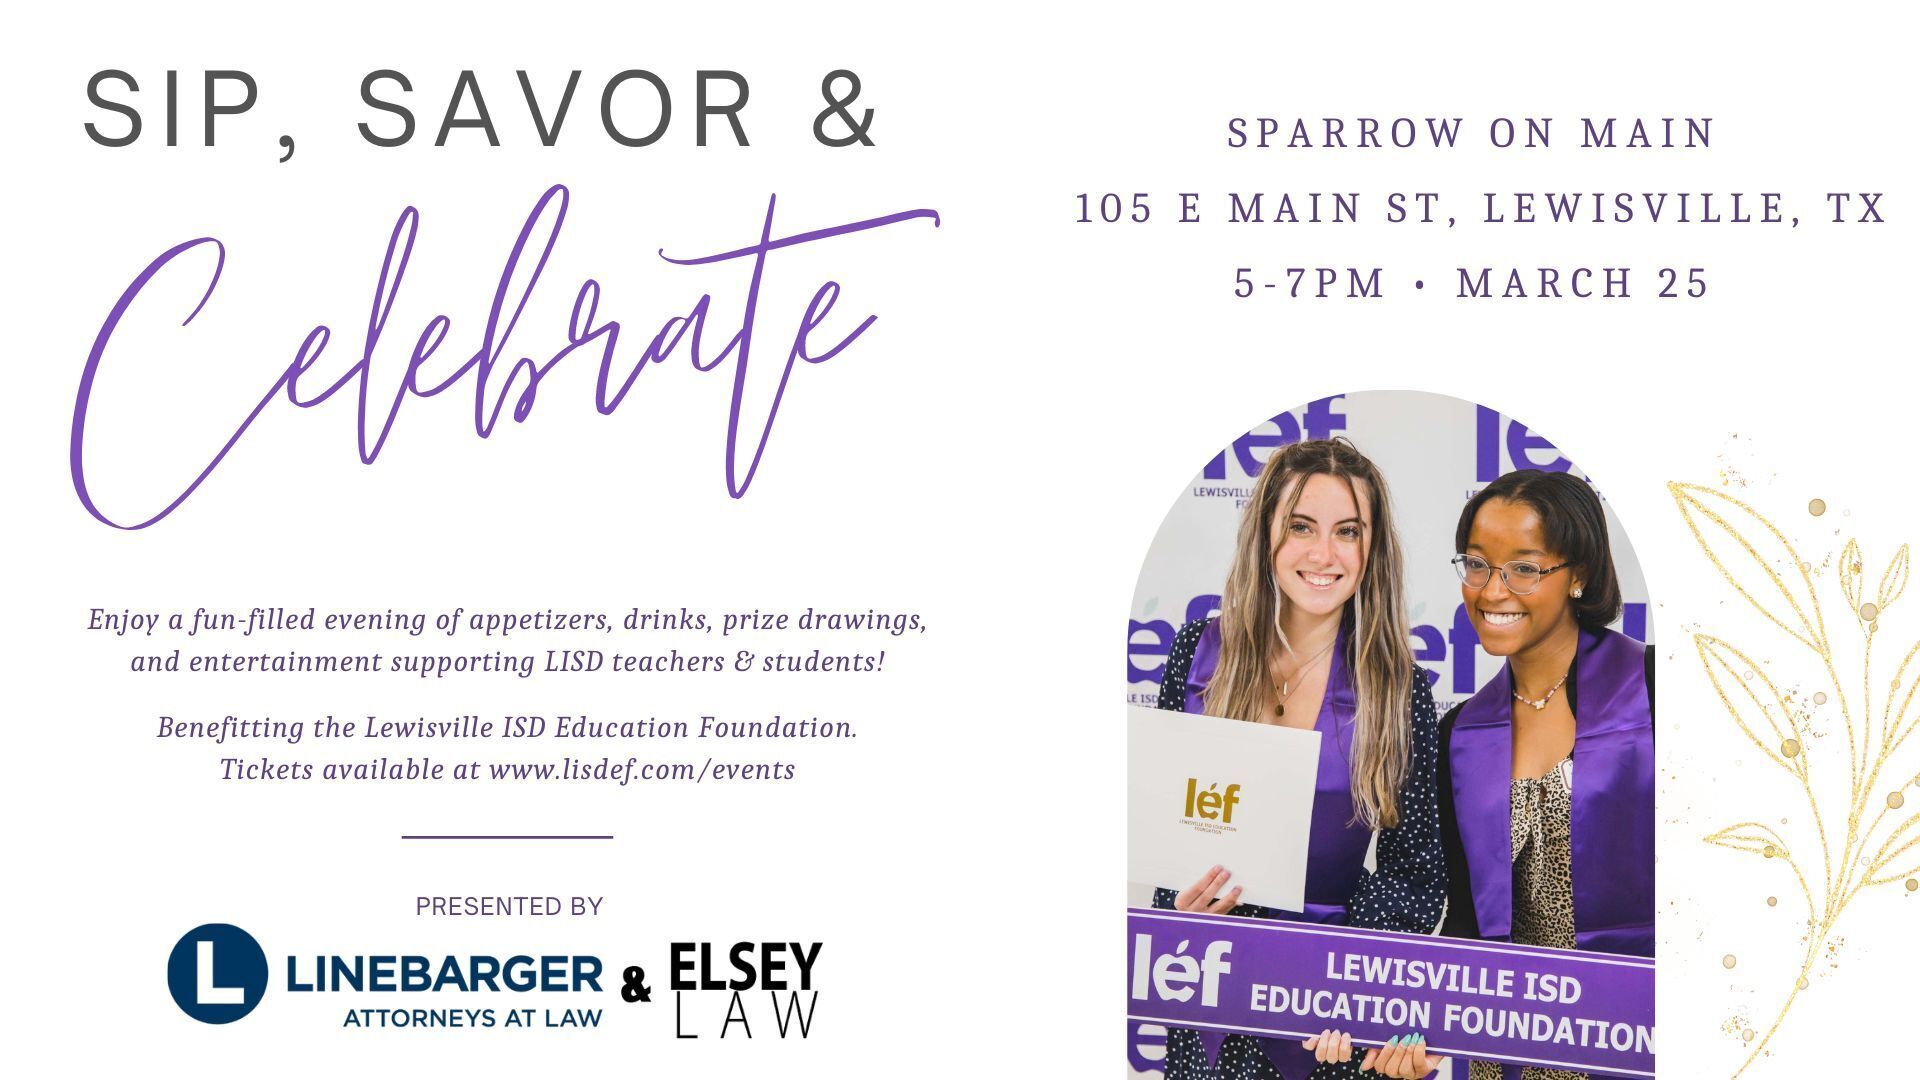 Save the Date for LEF's Sip, Savor & Celebrate Event!